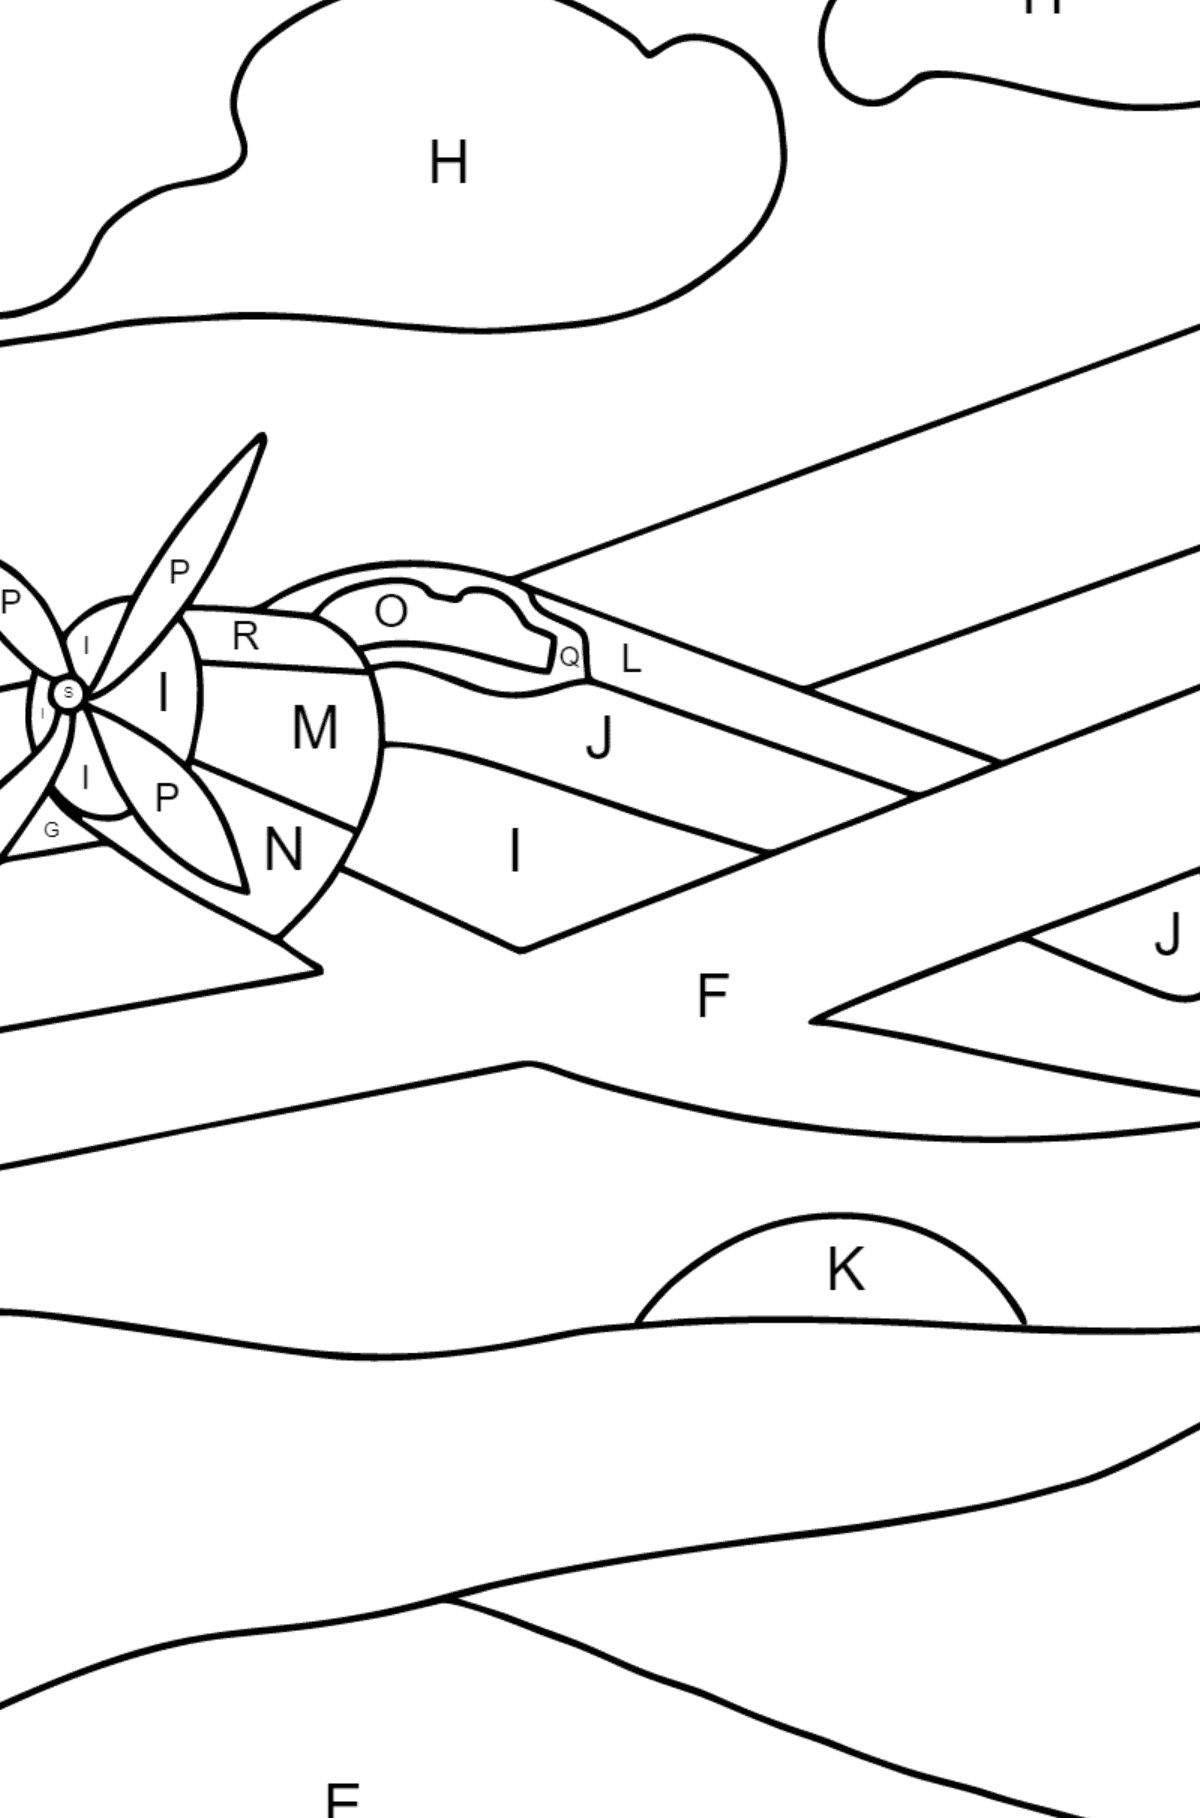 Coloring Page - A Biplane - Coloring by Letters for Kids